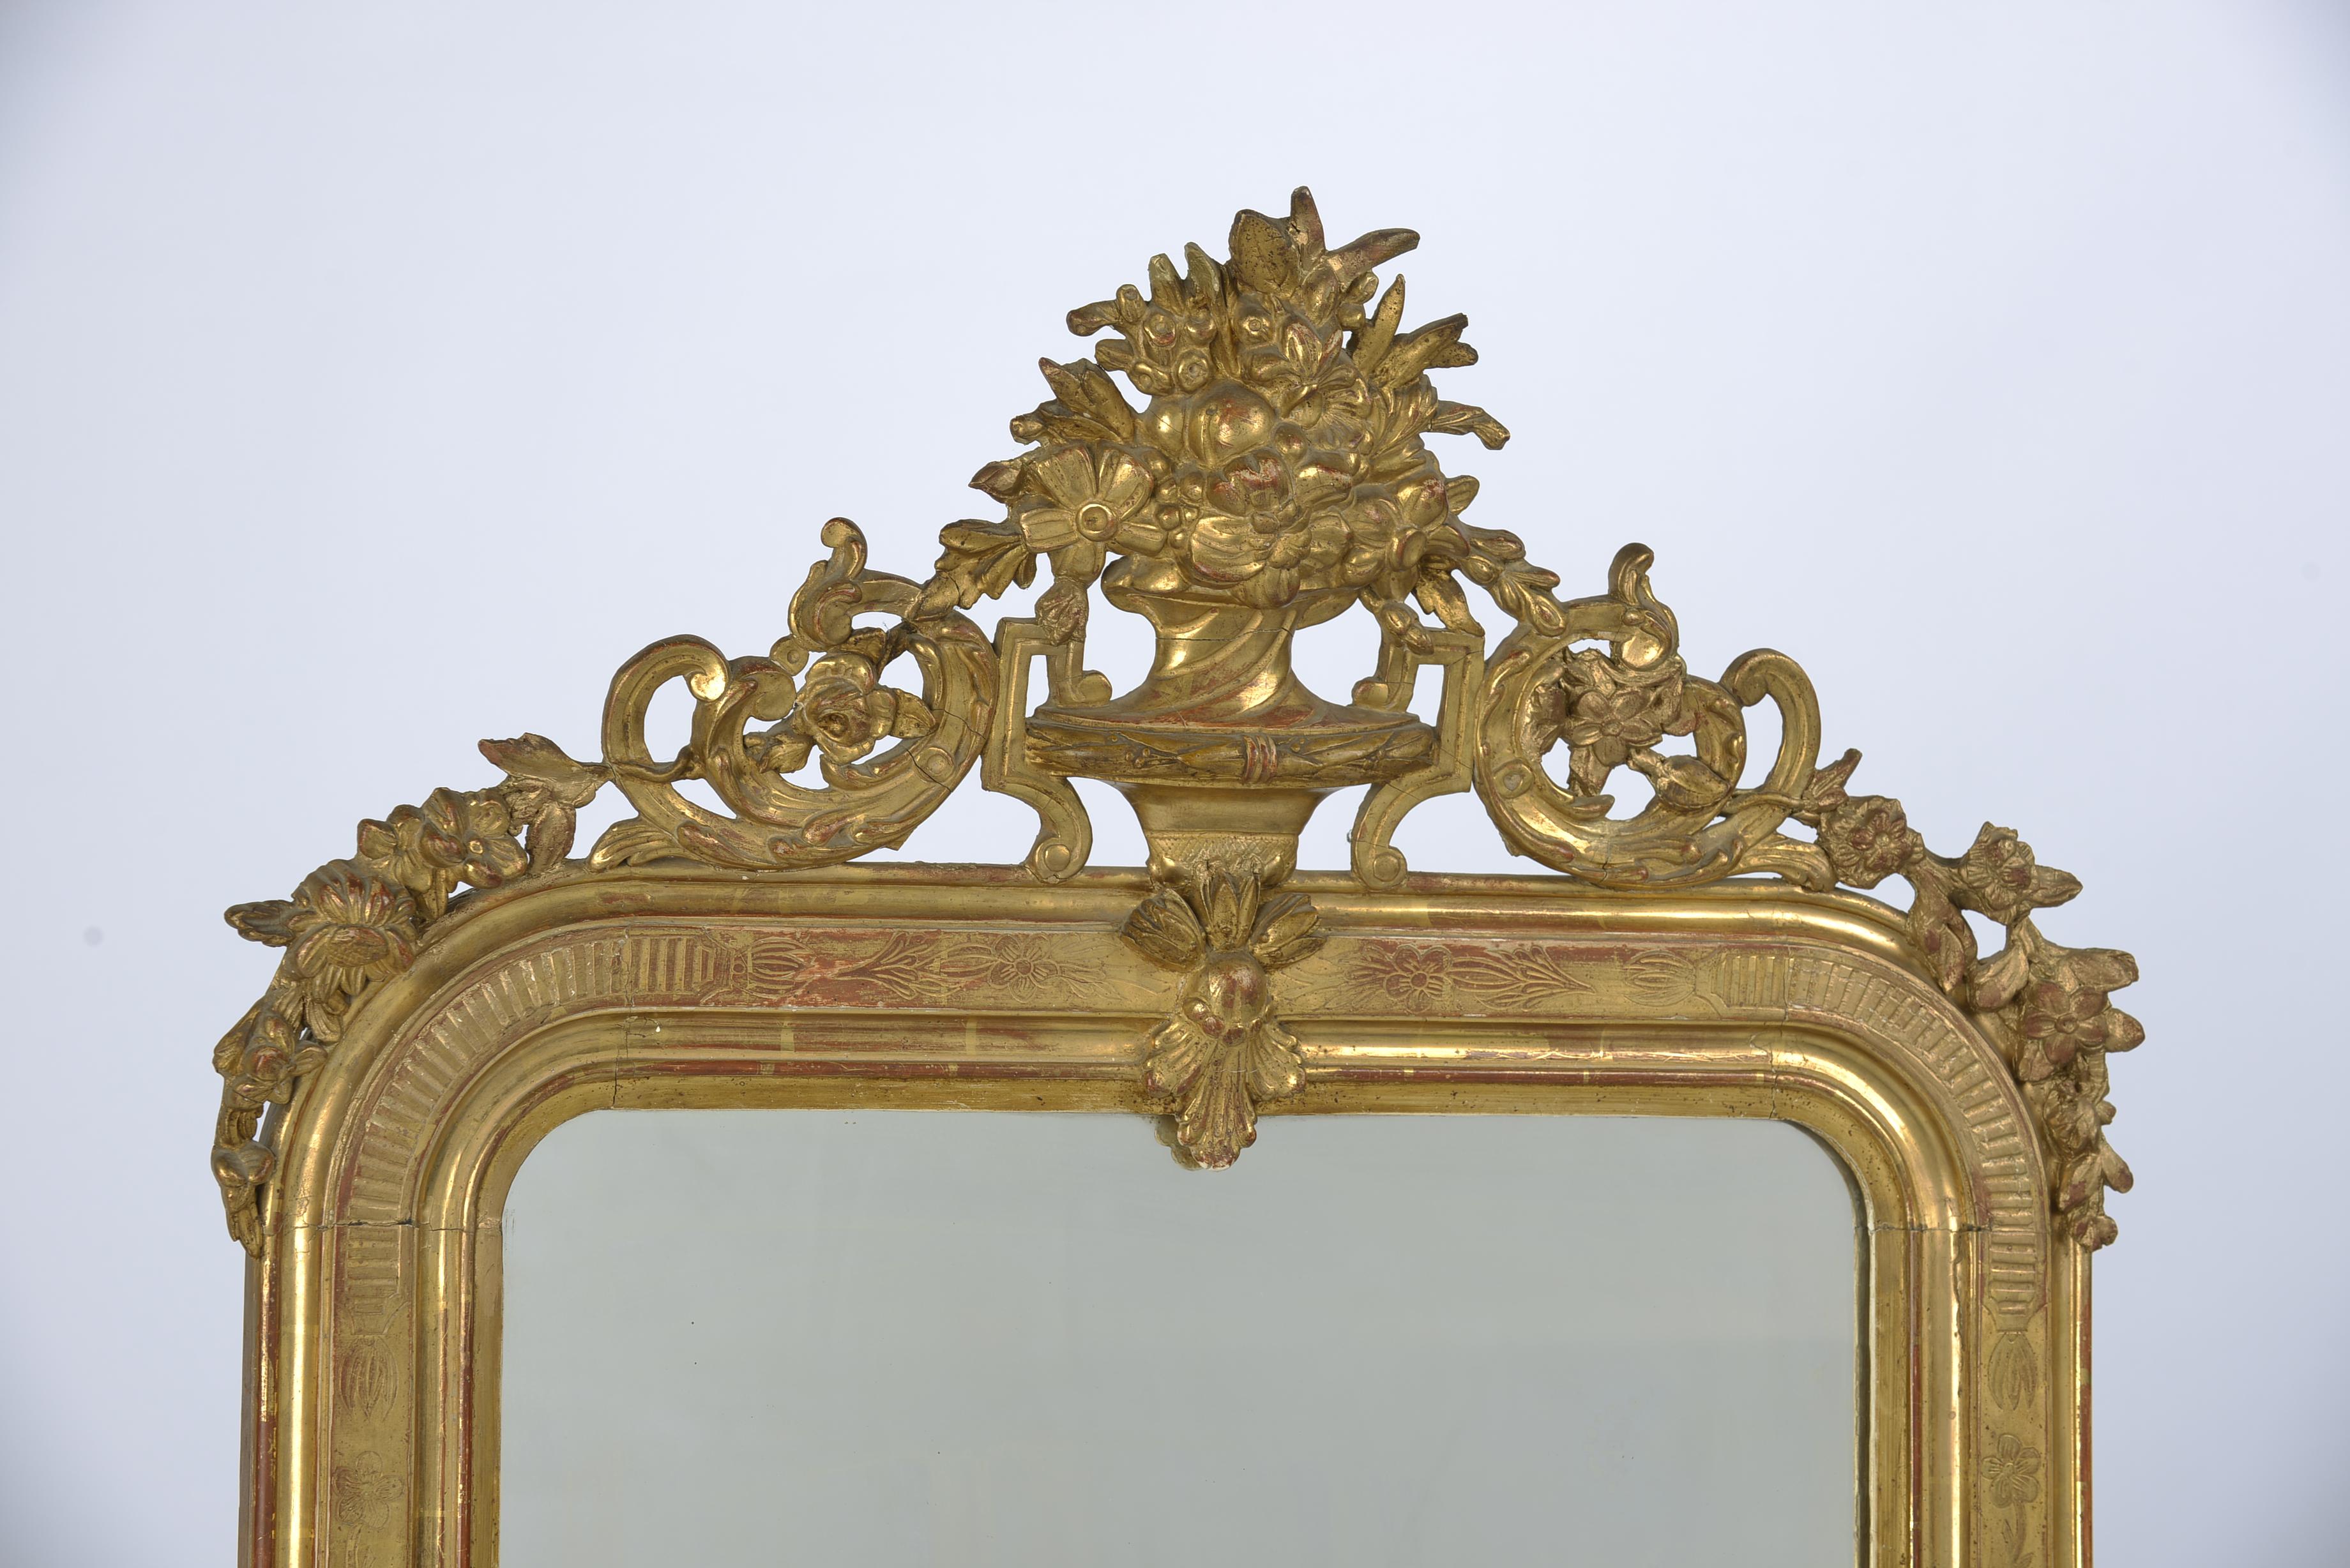 A beautiful antique mirror that originates in France, circa 1890.
The mirror has the upper rounded corners typical for Louis Philippe mirrors. The mirror has a rich, ornamented crest with a central goblet with flowers flanked by acanthus and